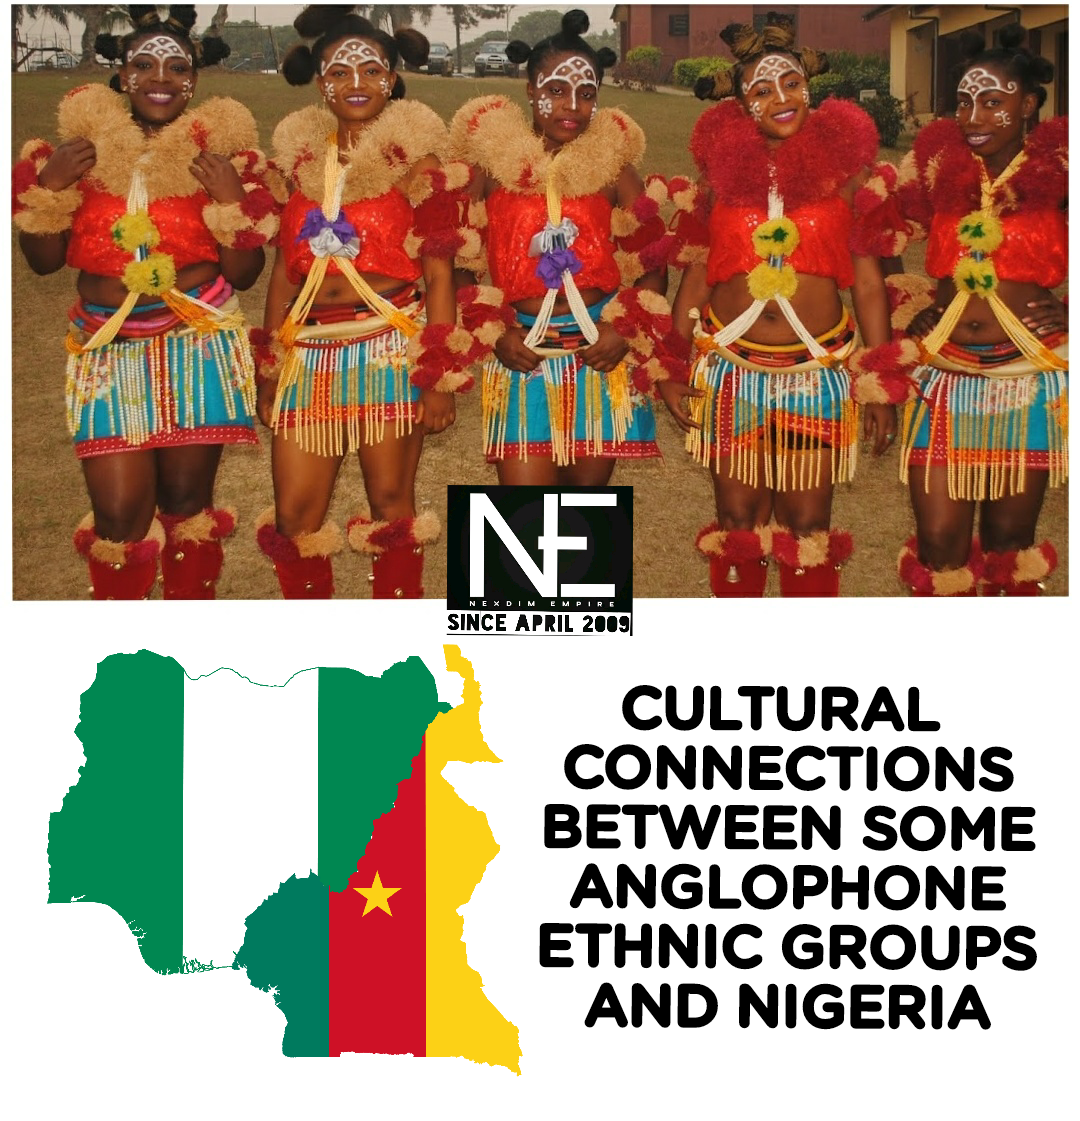 CULTURAL CONNECTIONS BETWEEN SOME ANGLOPHONE CAMEROON ETHNIC GROUPS AND NIGERIA